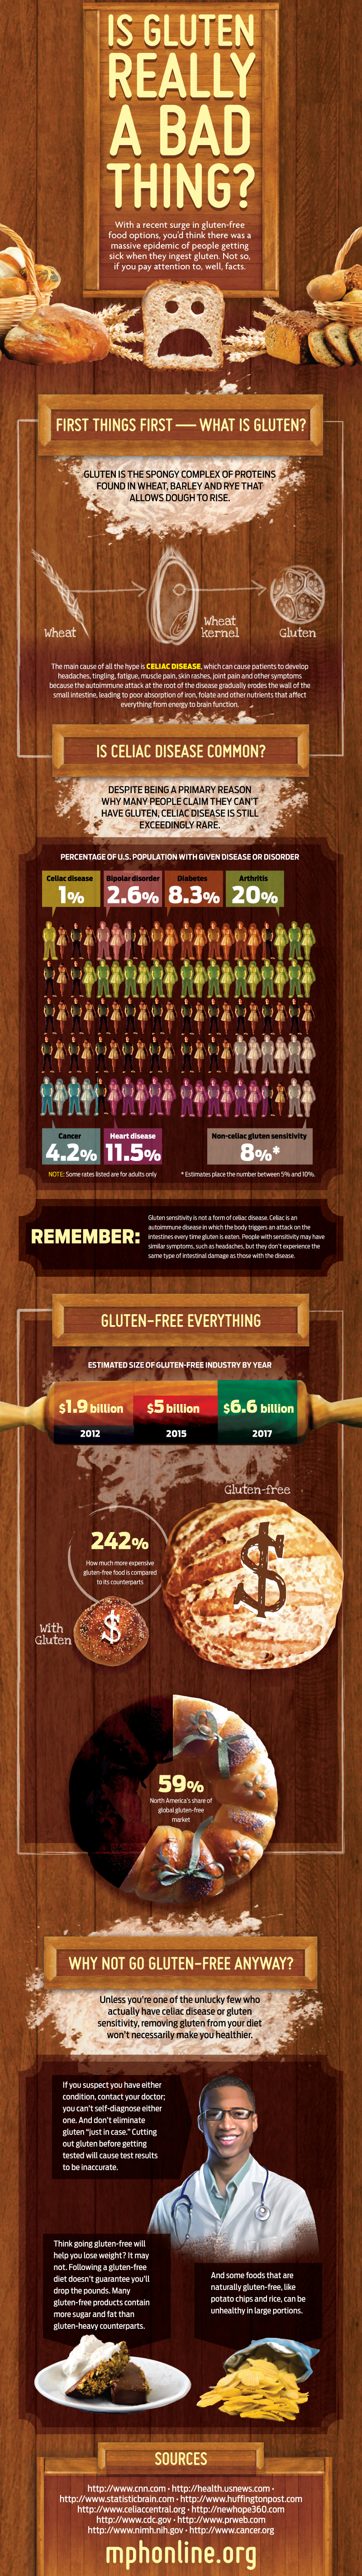 Is Gluten Really a Bad Thing?